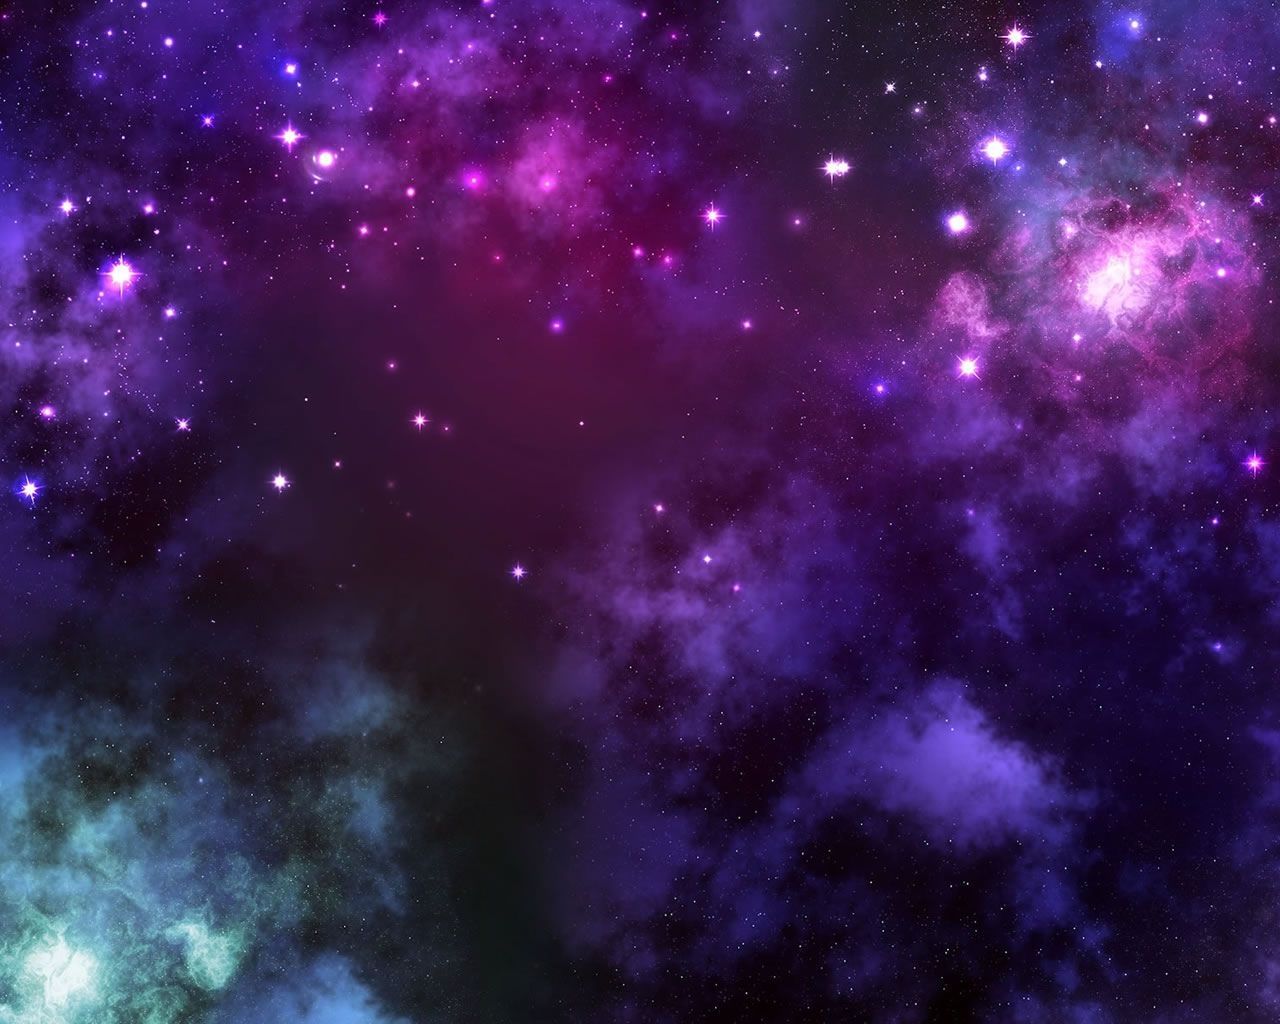 Galaxy Background Tumblr Hipster